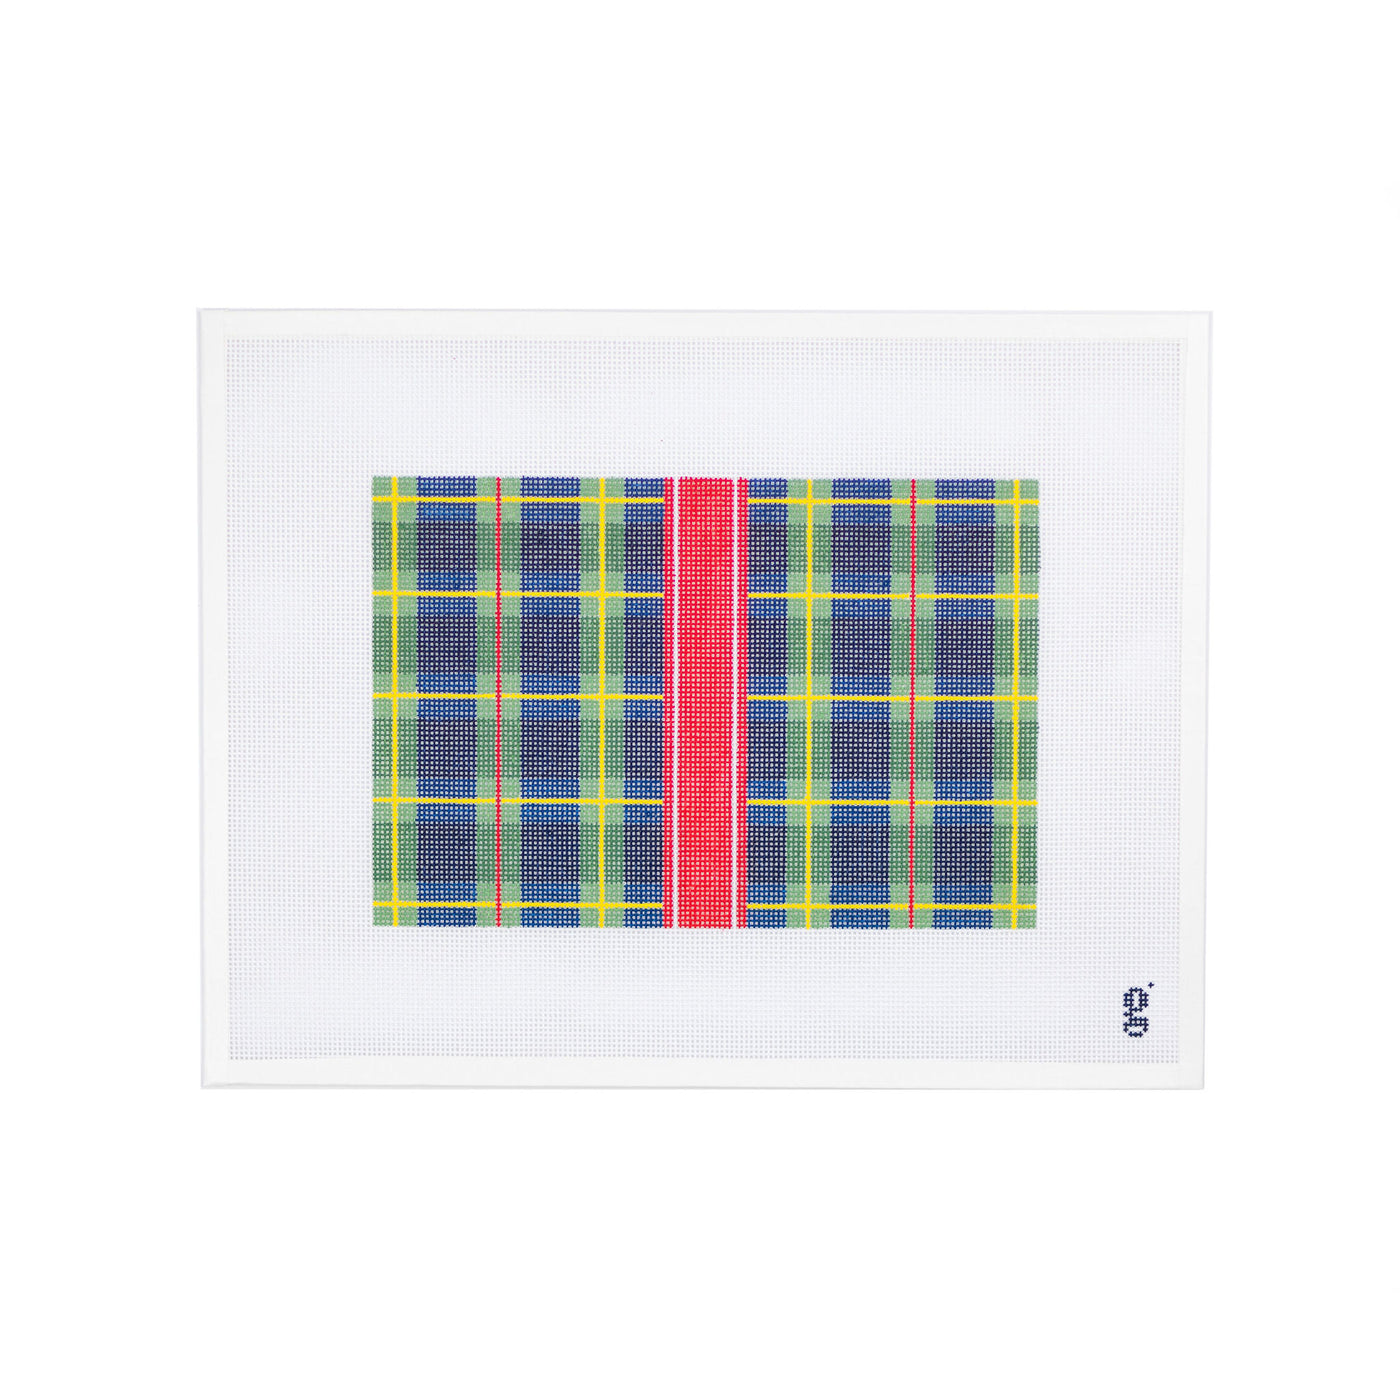 White rectangular needlepoint canvas featuring a blue, green, yellow & red tartan plaid. There is a red vertical stripe going down the middle of the design.